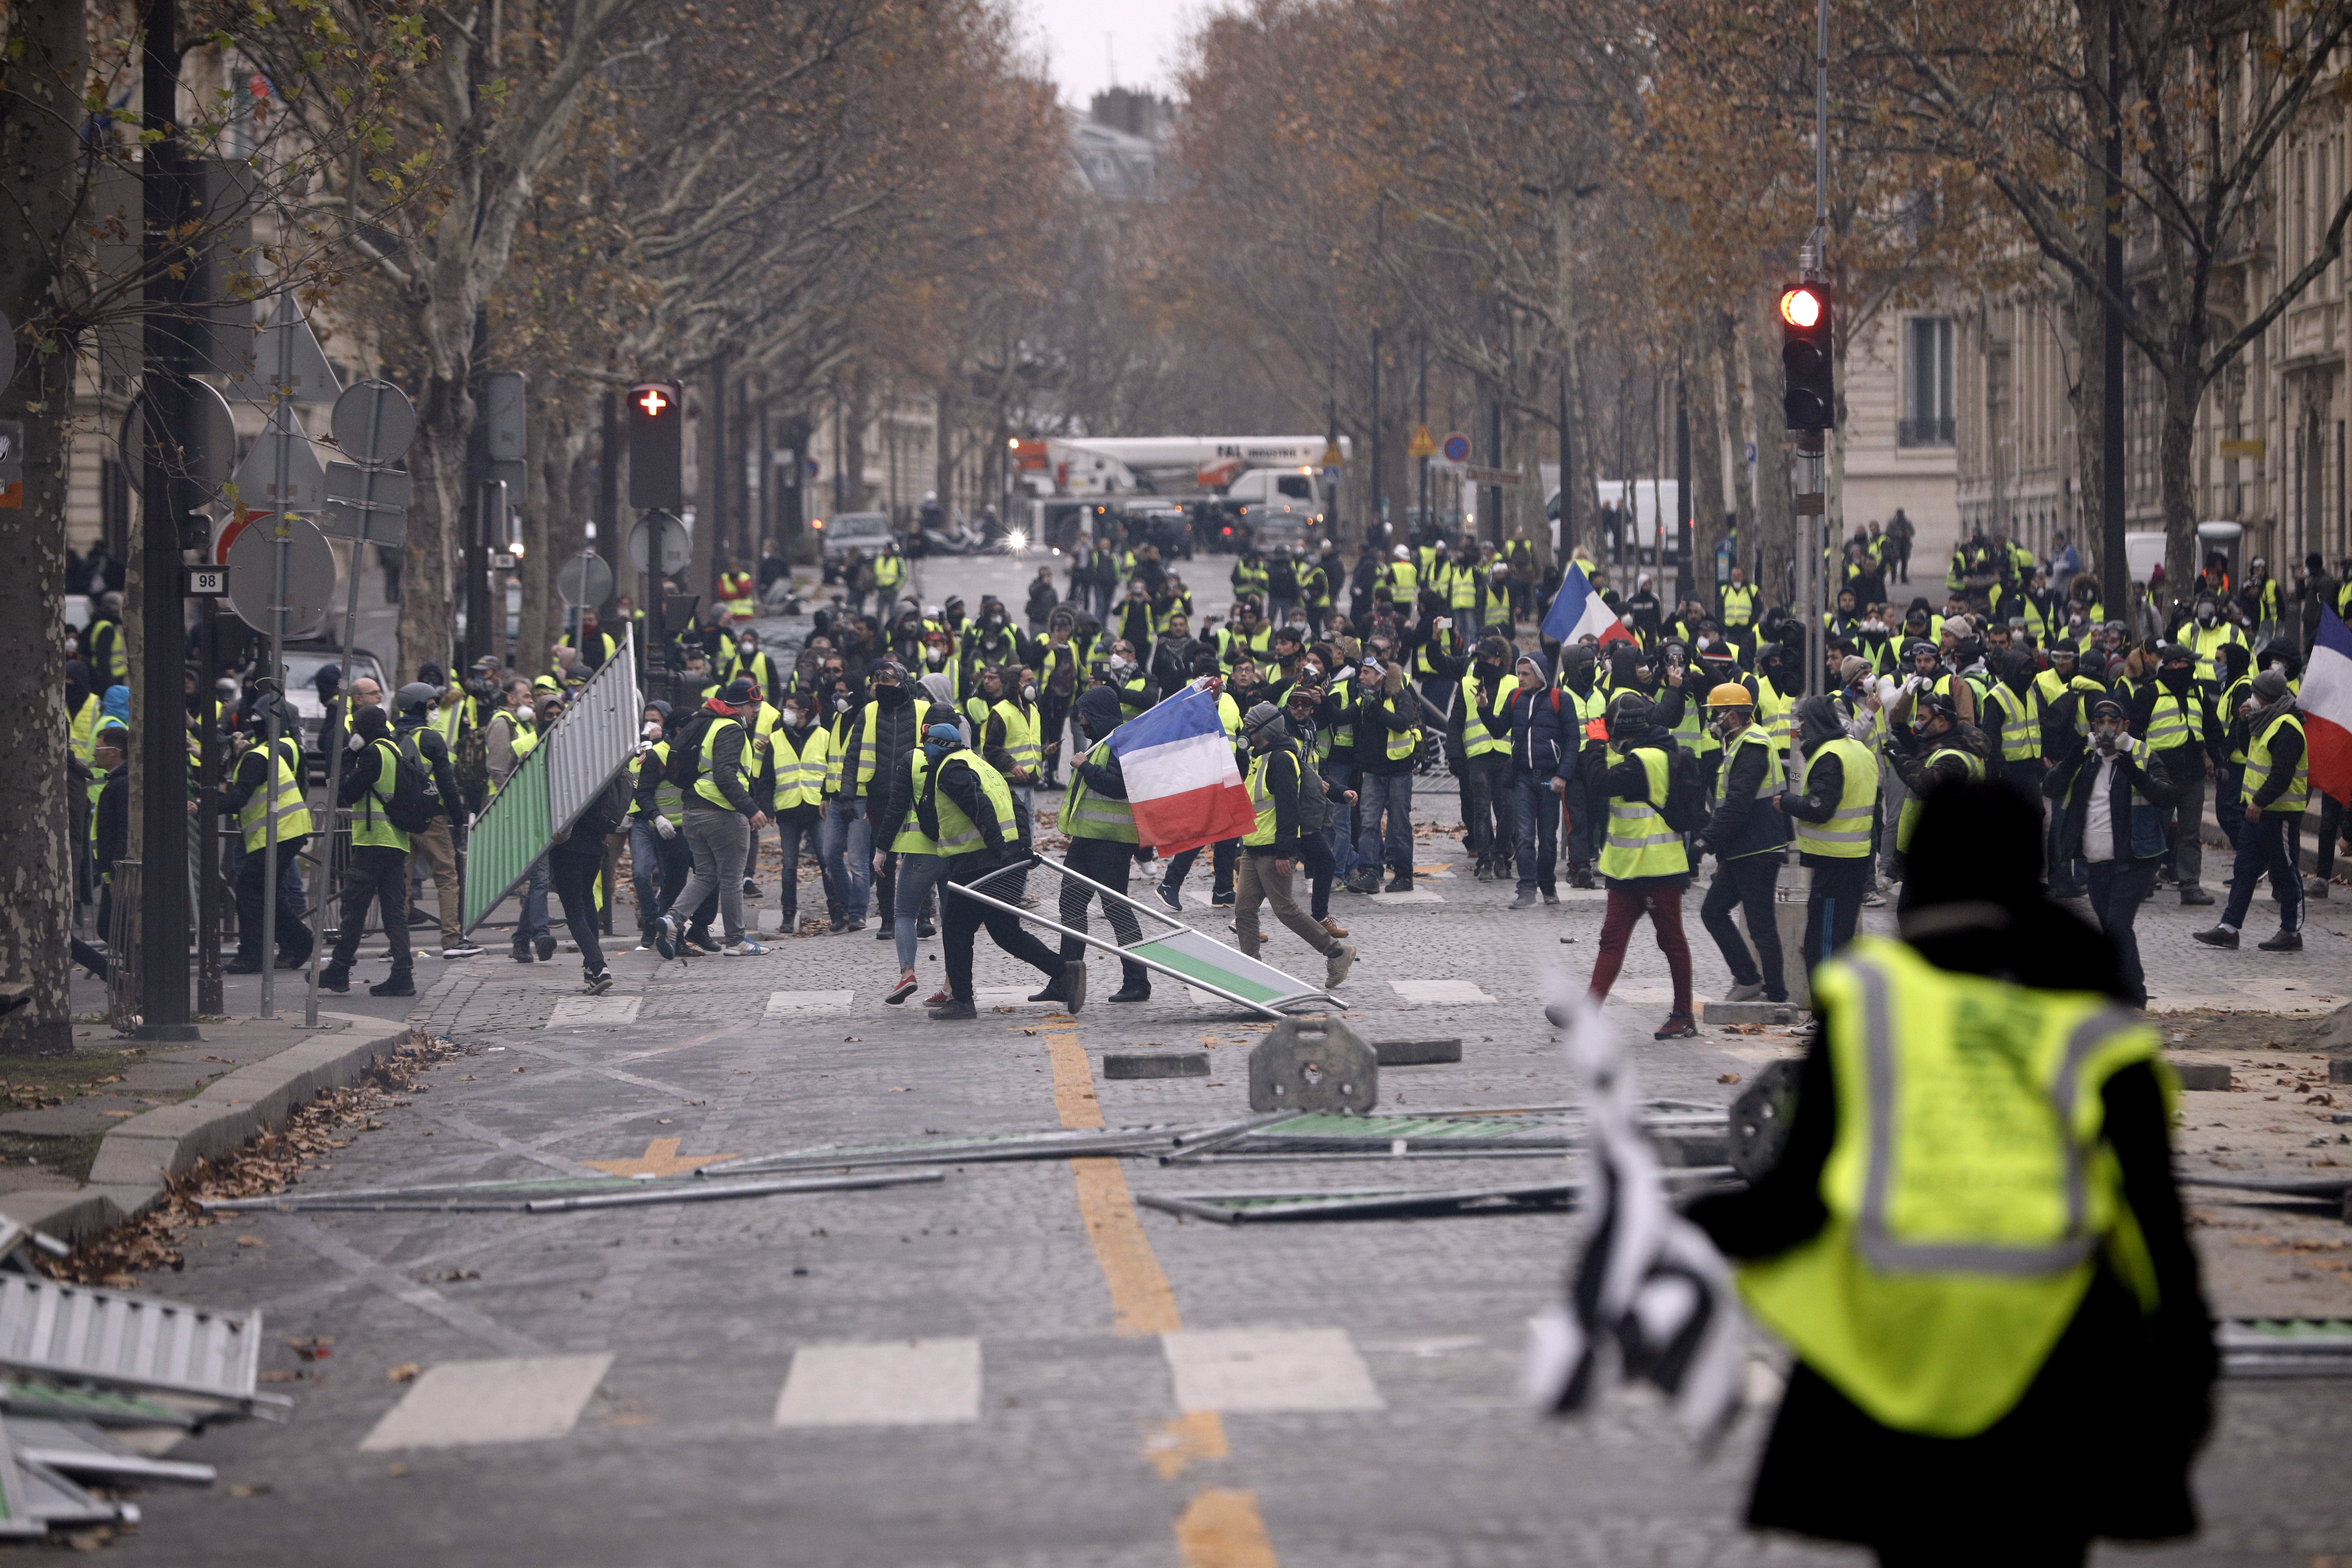 Demonstrators build a barricade near the Champs-Elysees during a demonstration